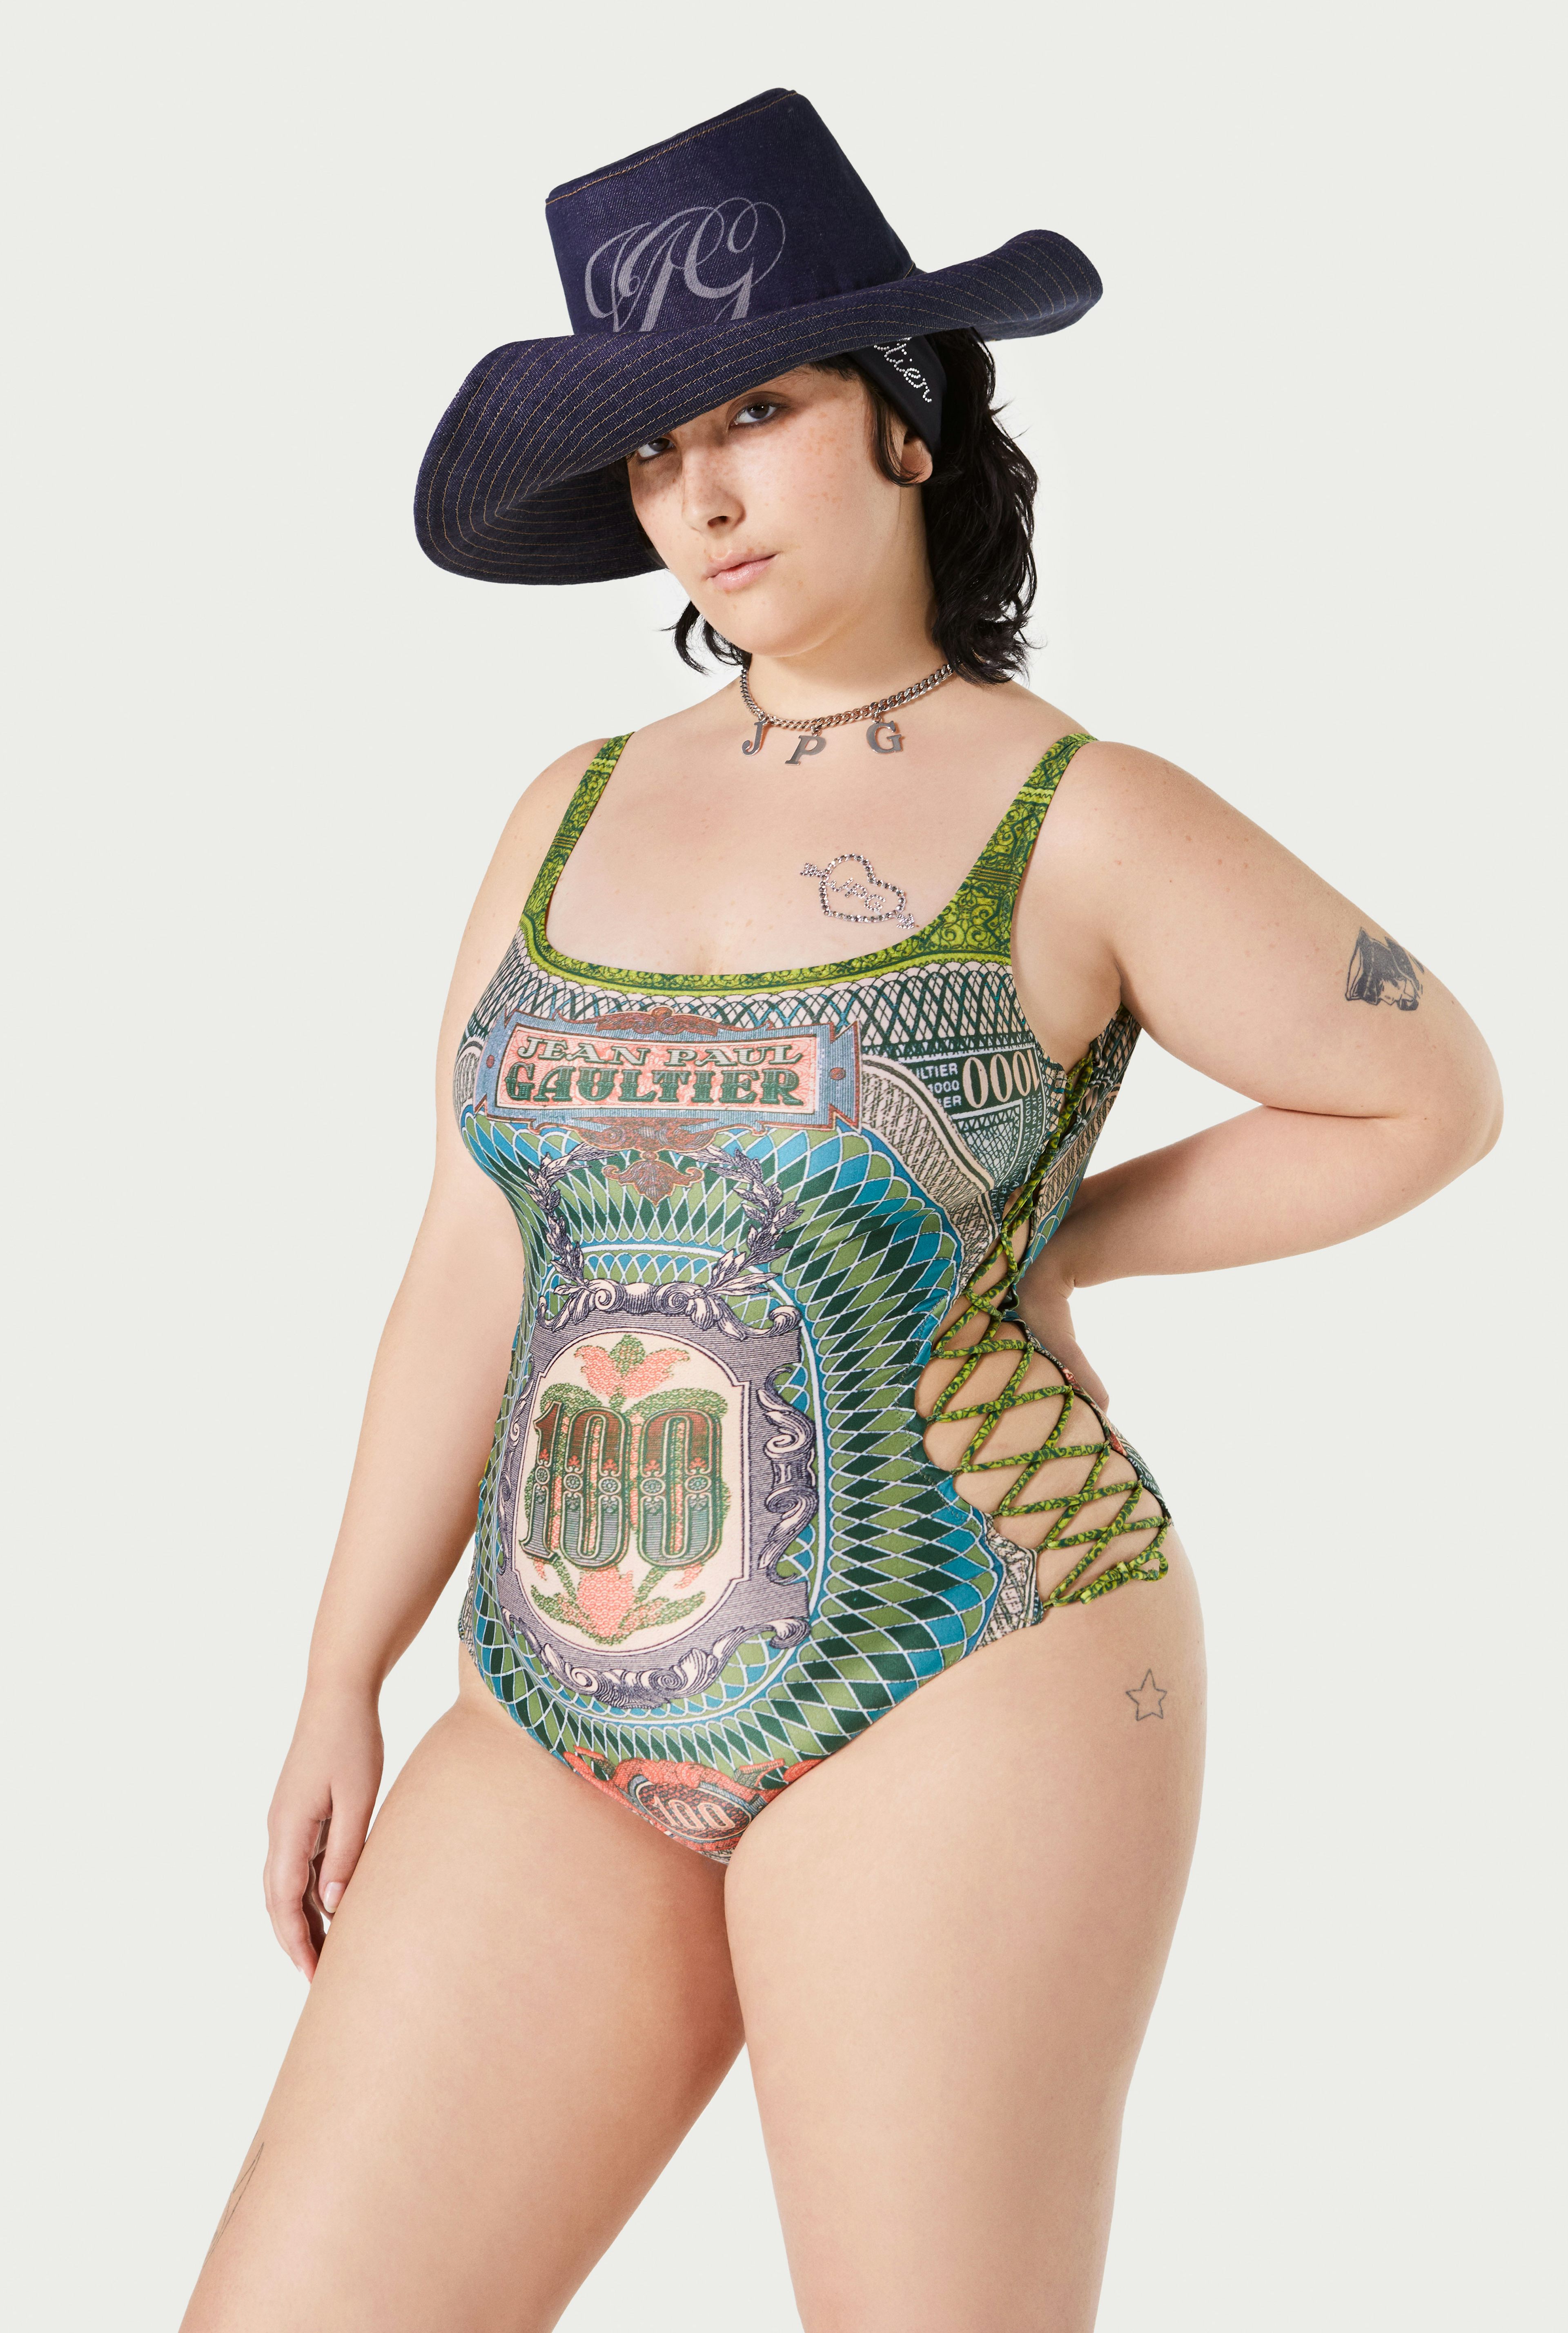 The Banknote Swimsuit